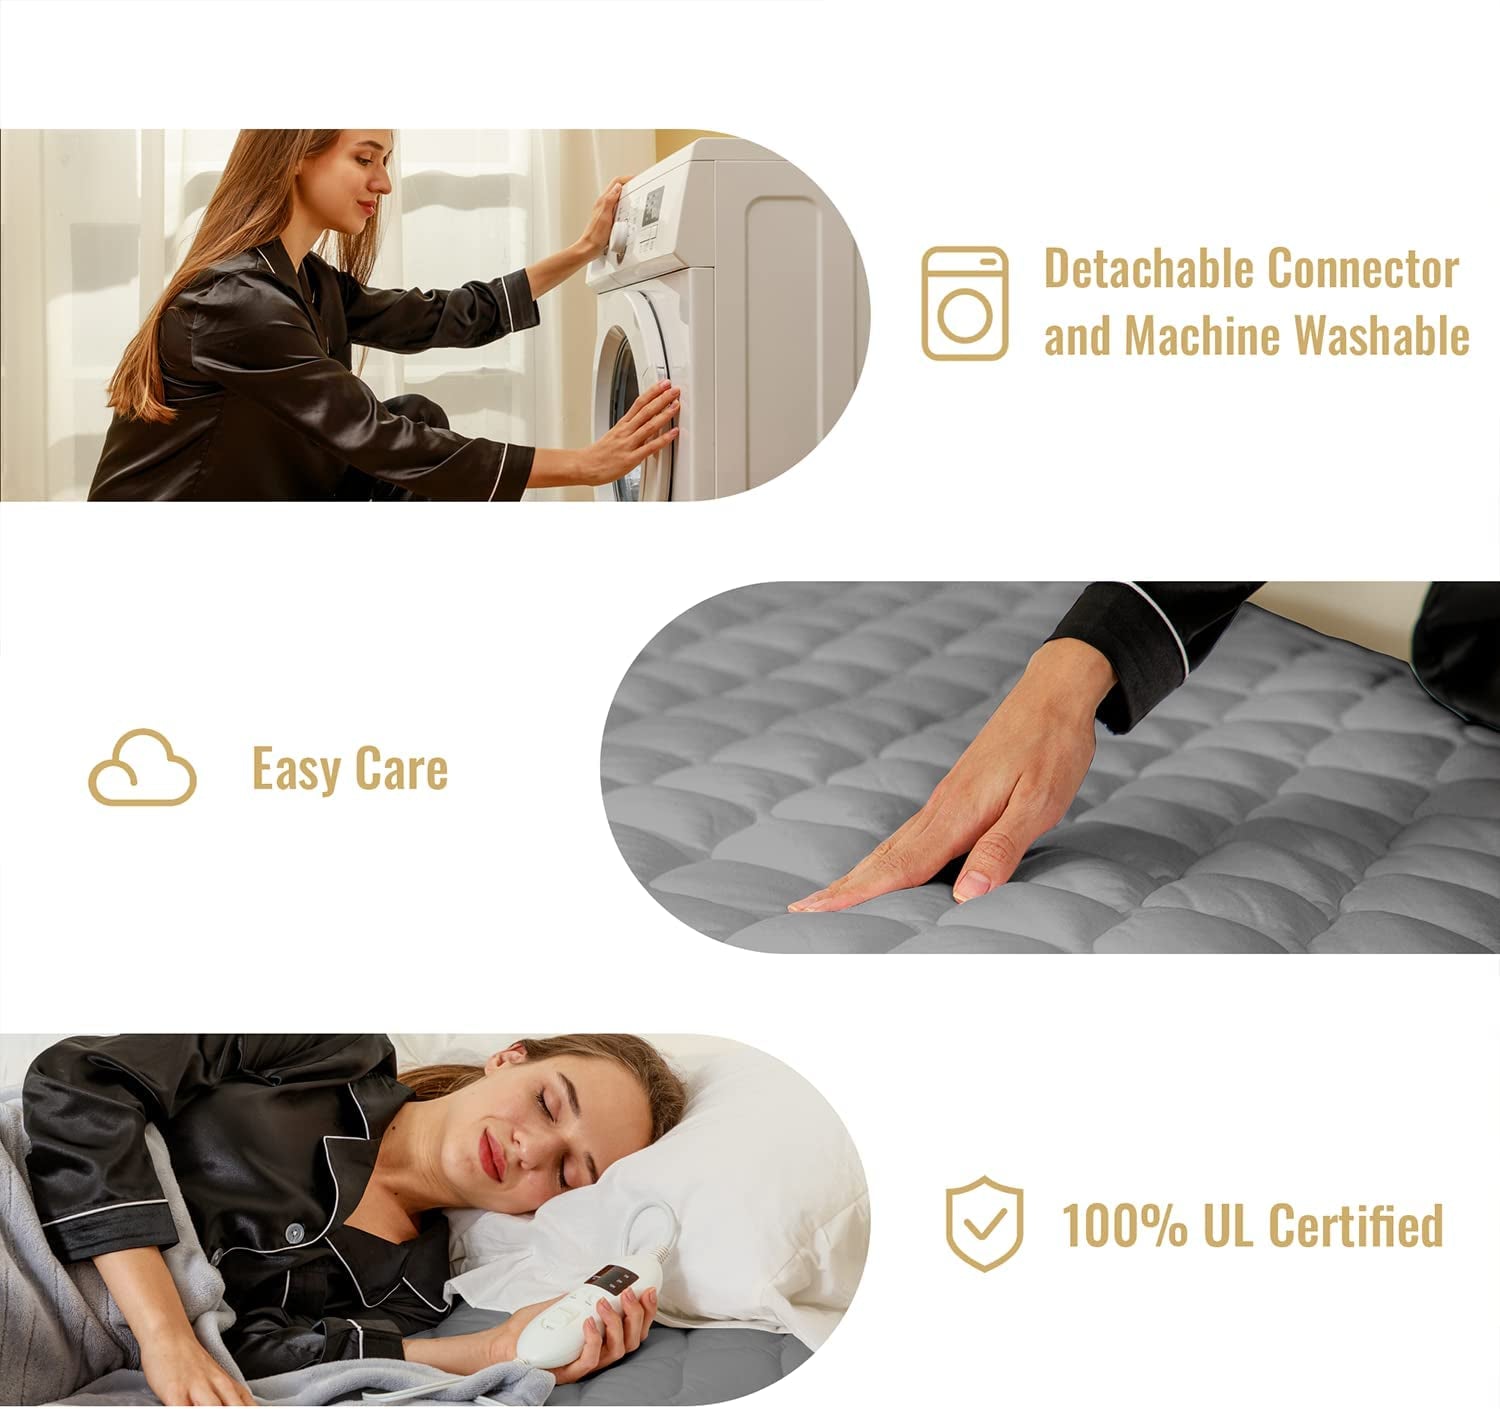 Heated Mattress Pad Adjustable Zone Heating with 8 Heat Settings Controller Quilted Electric Mattress Pad Fit up to 21 Inch